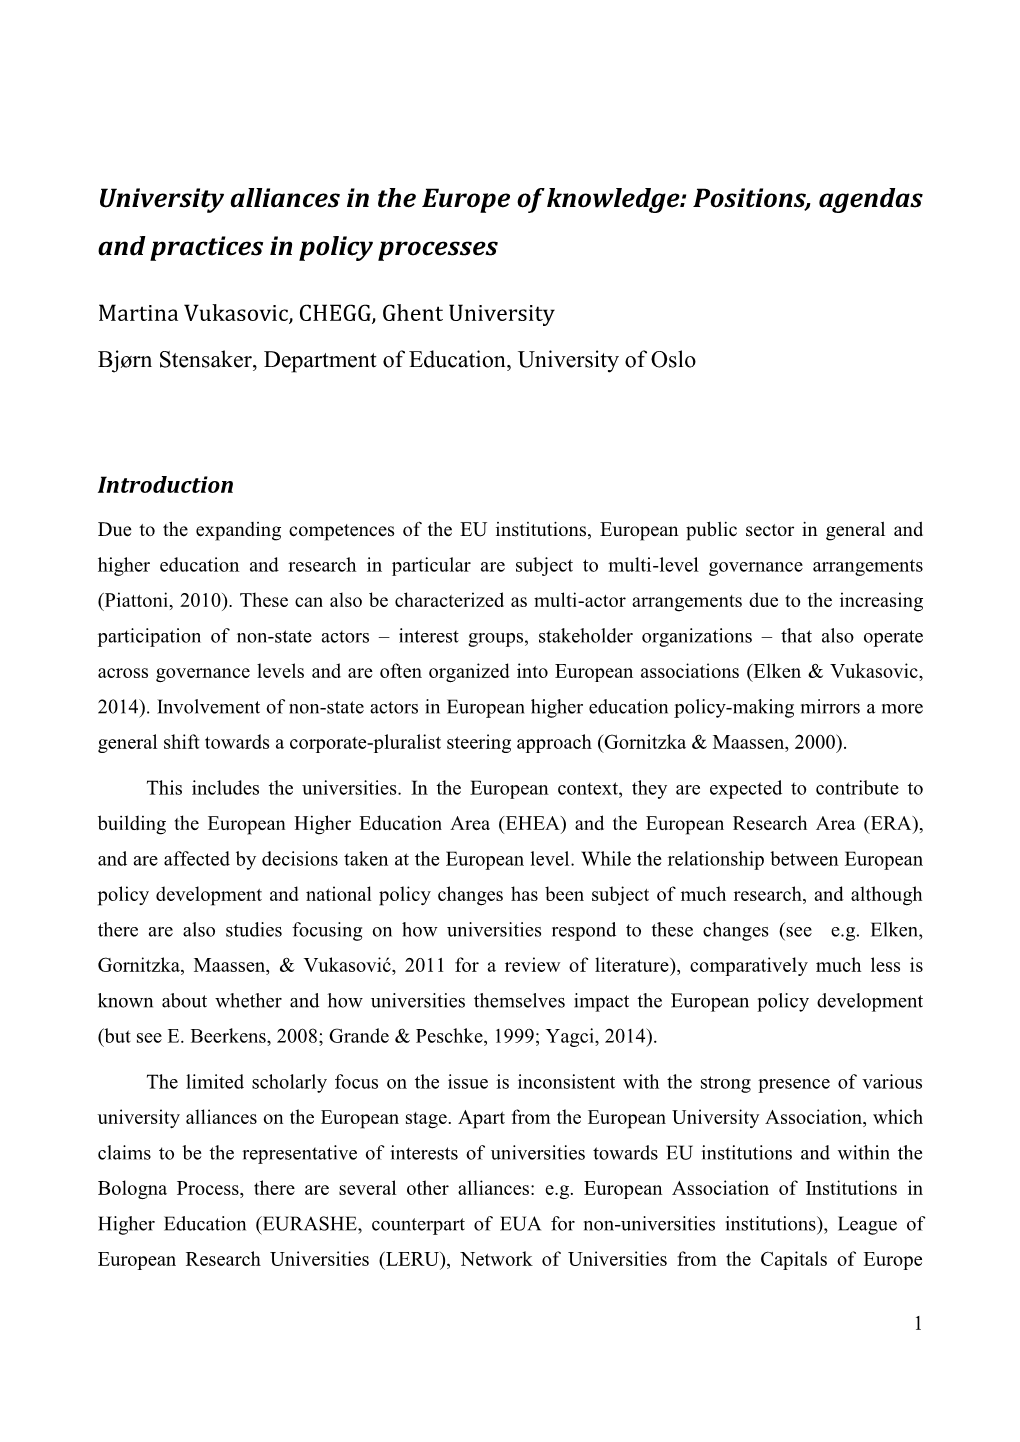 University Alliances in the Europe of Knowledge: Positions, Agendas and Practices in Policy Processes